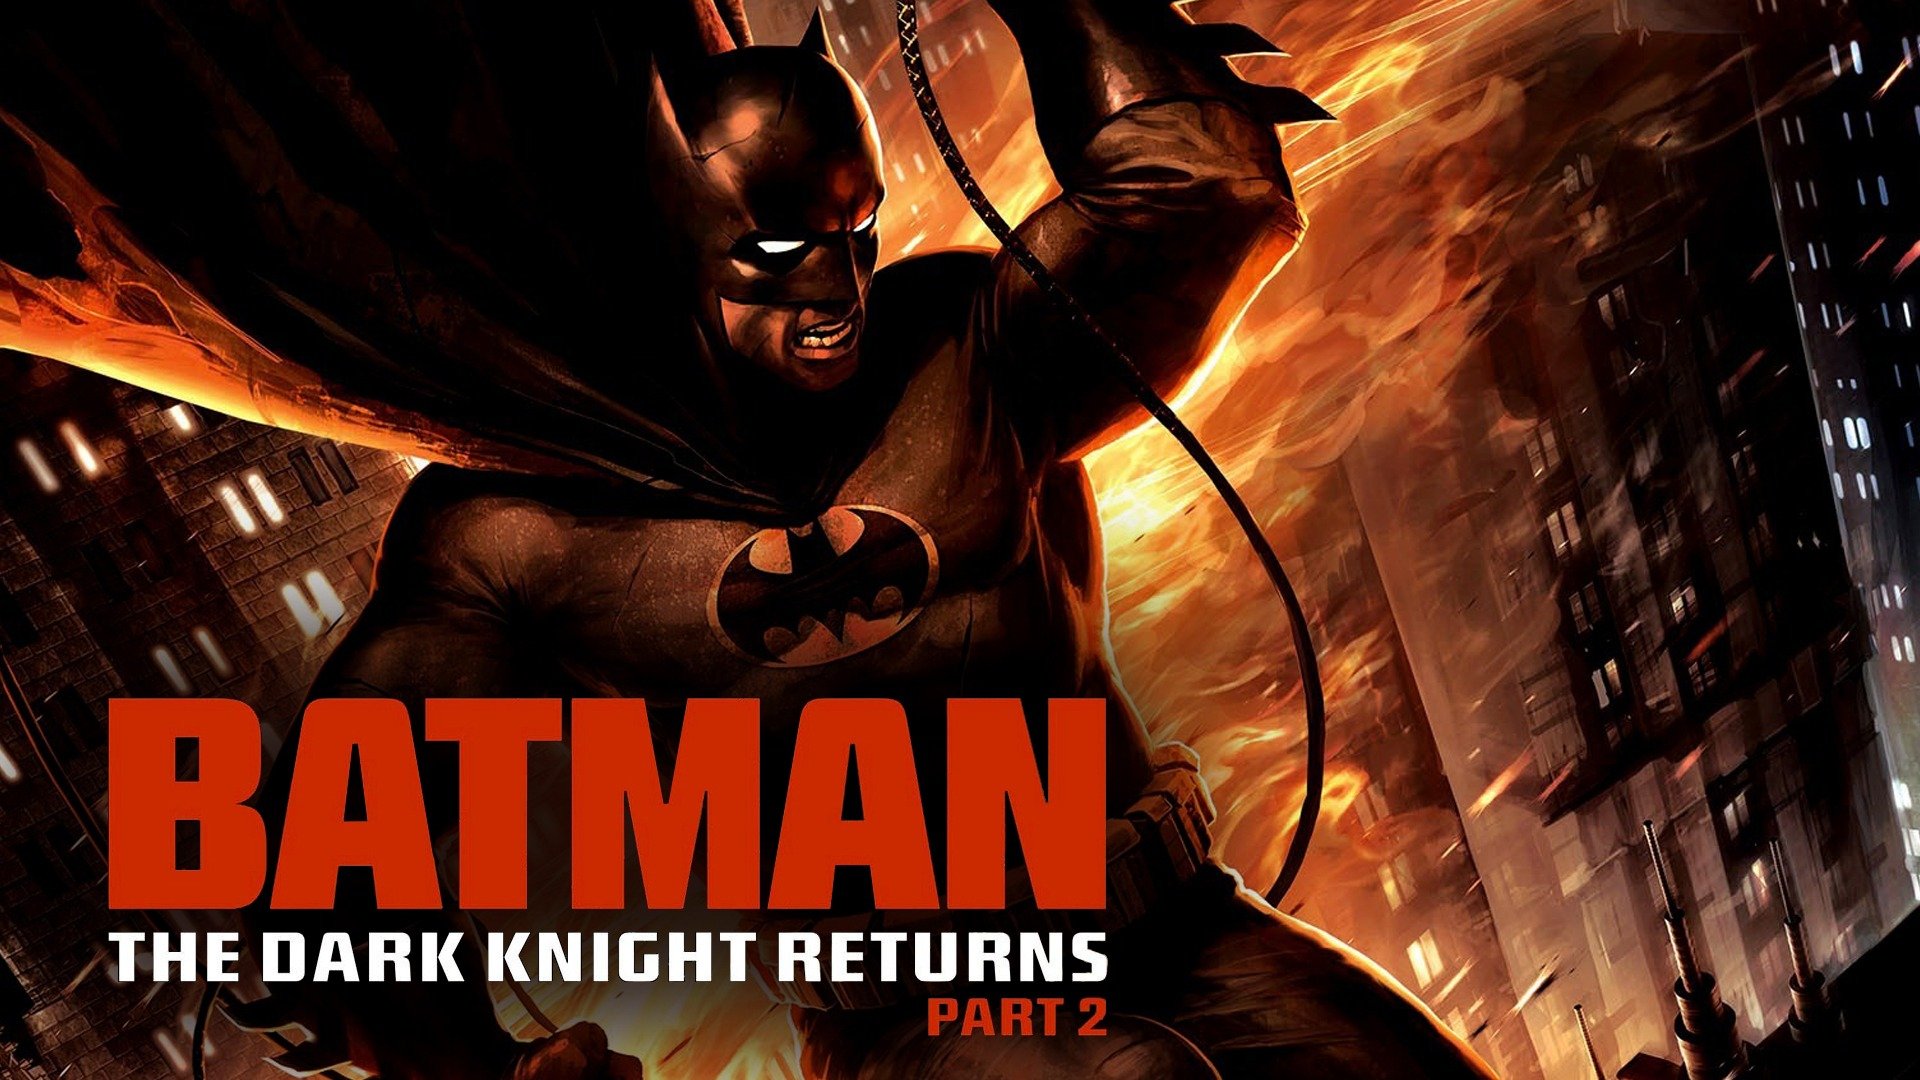 47-facts-about-the-movie-batman-the-dark-knight-returns